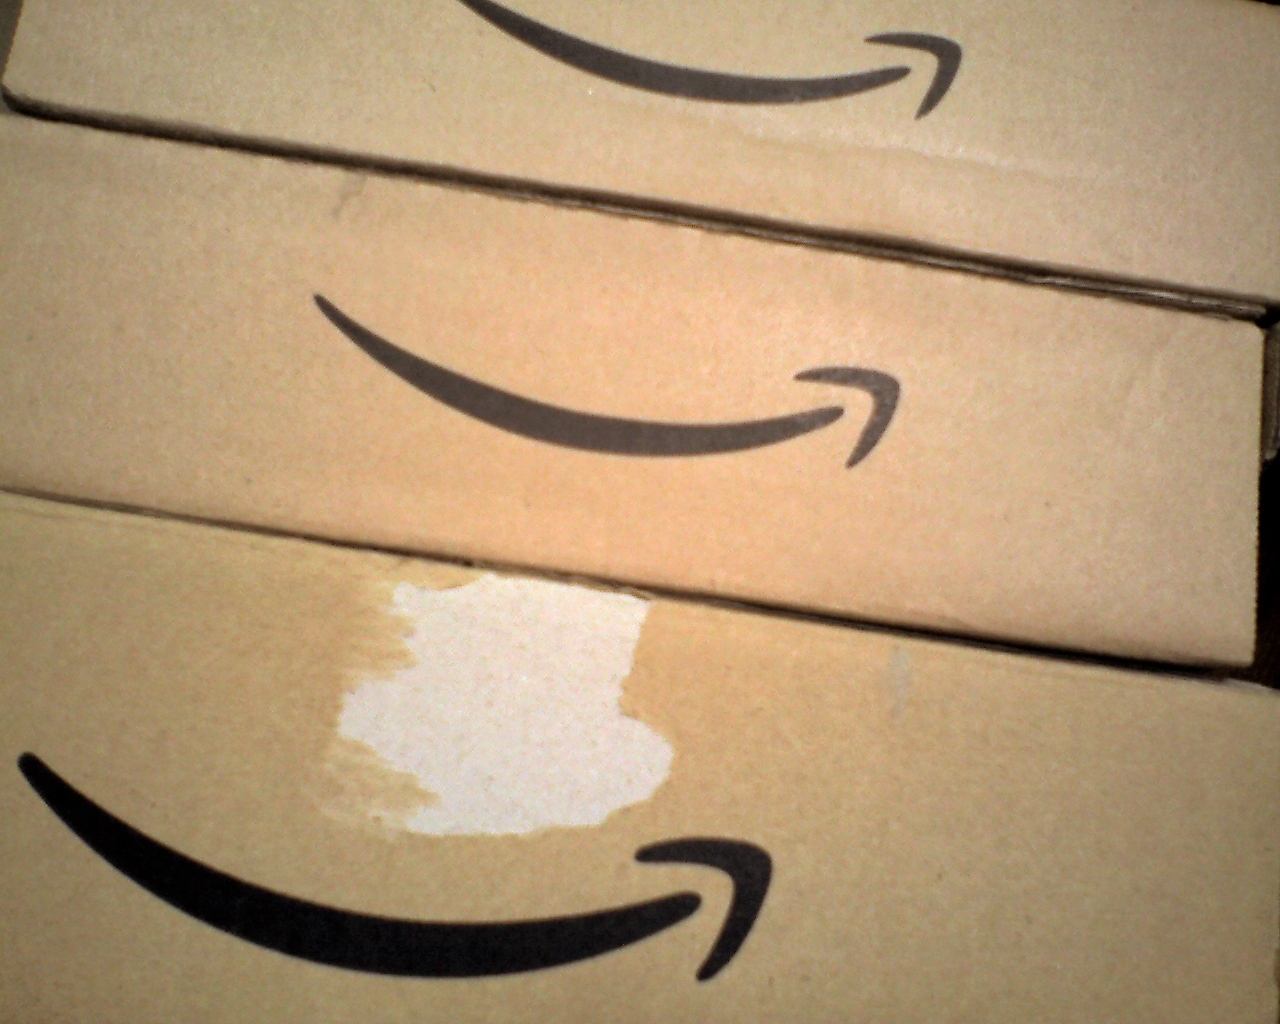 Amazon Doesn’t Just Want To Send You Stuff, It Wants To Handle Shipping Too